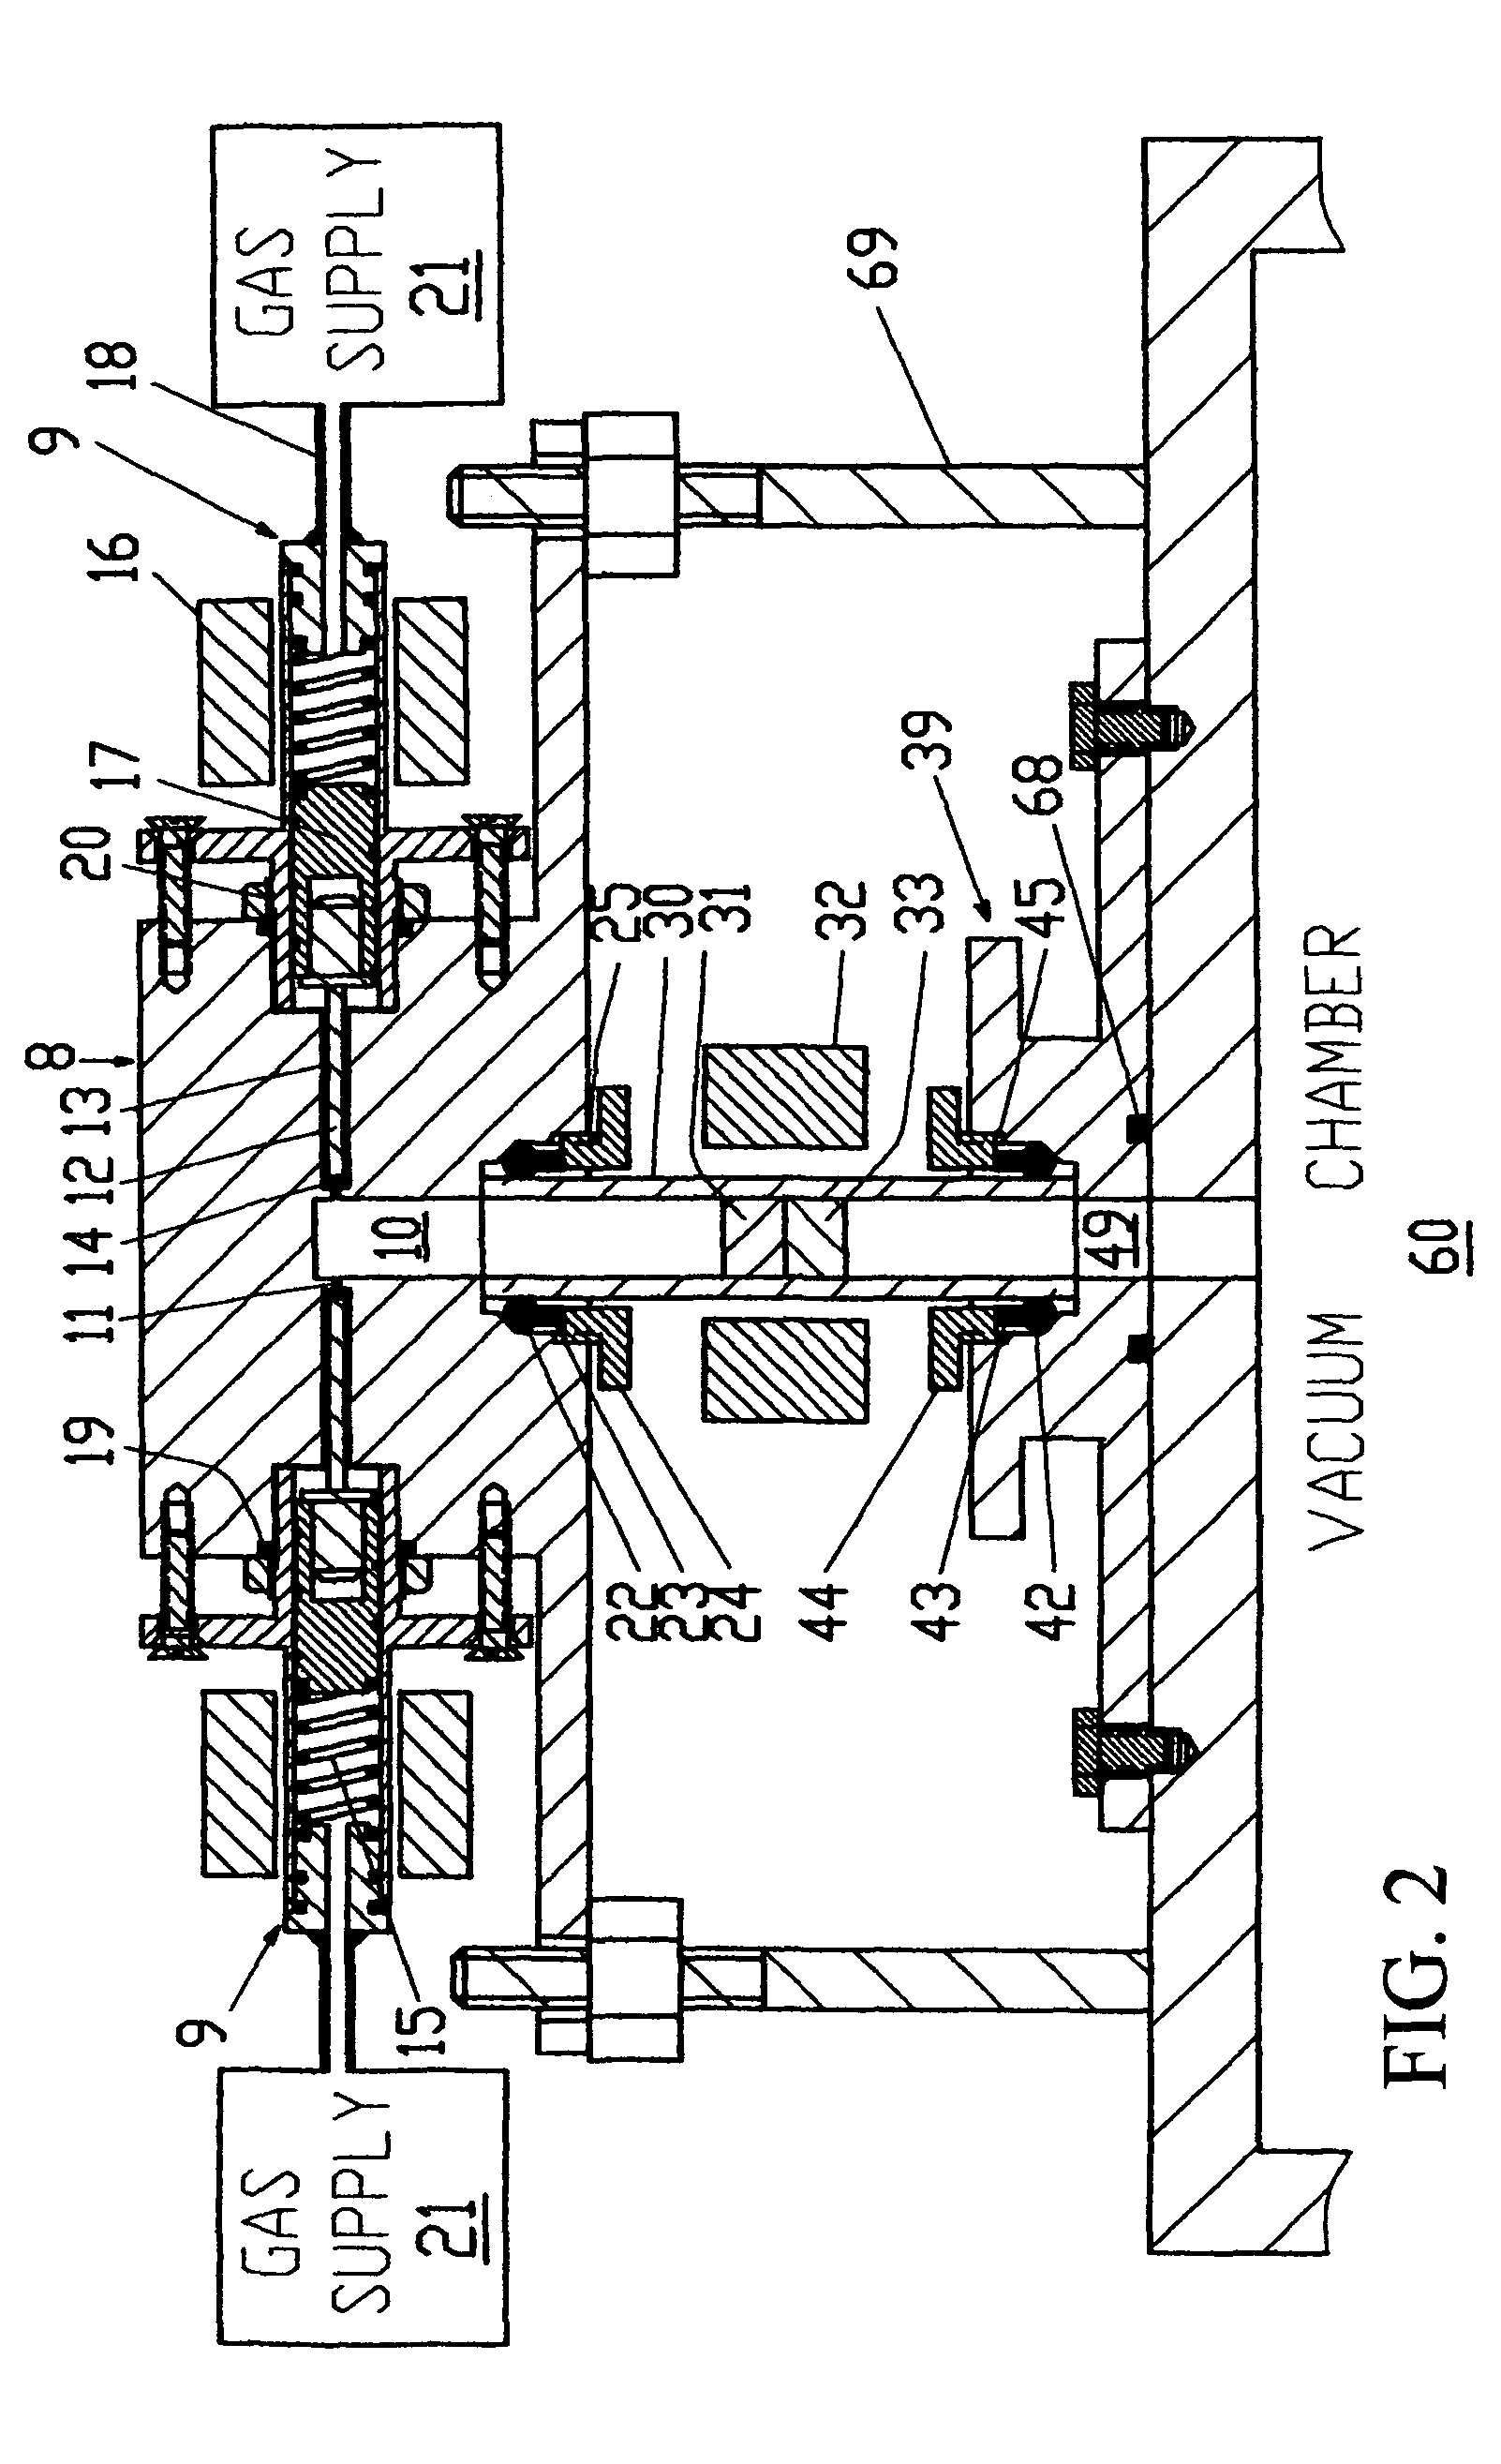 Apparatus and method to measure the kinetics parameters of a porous powder catalyst